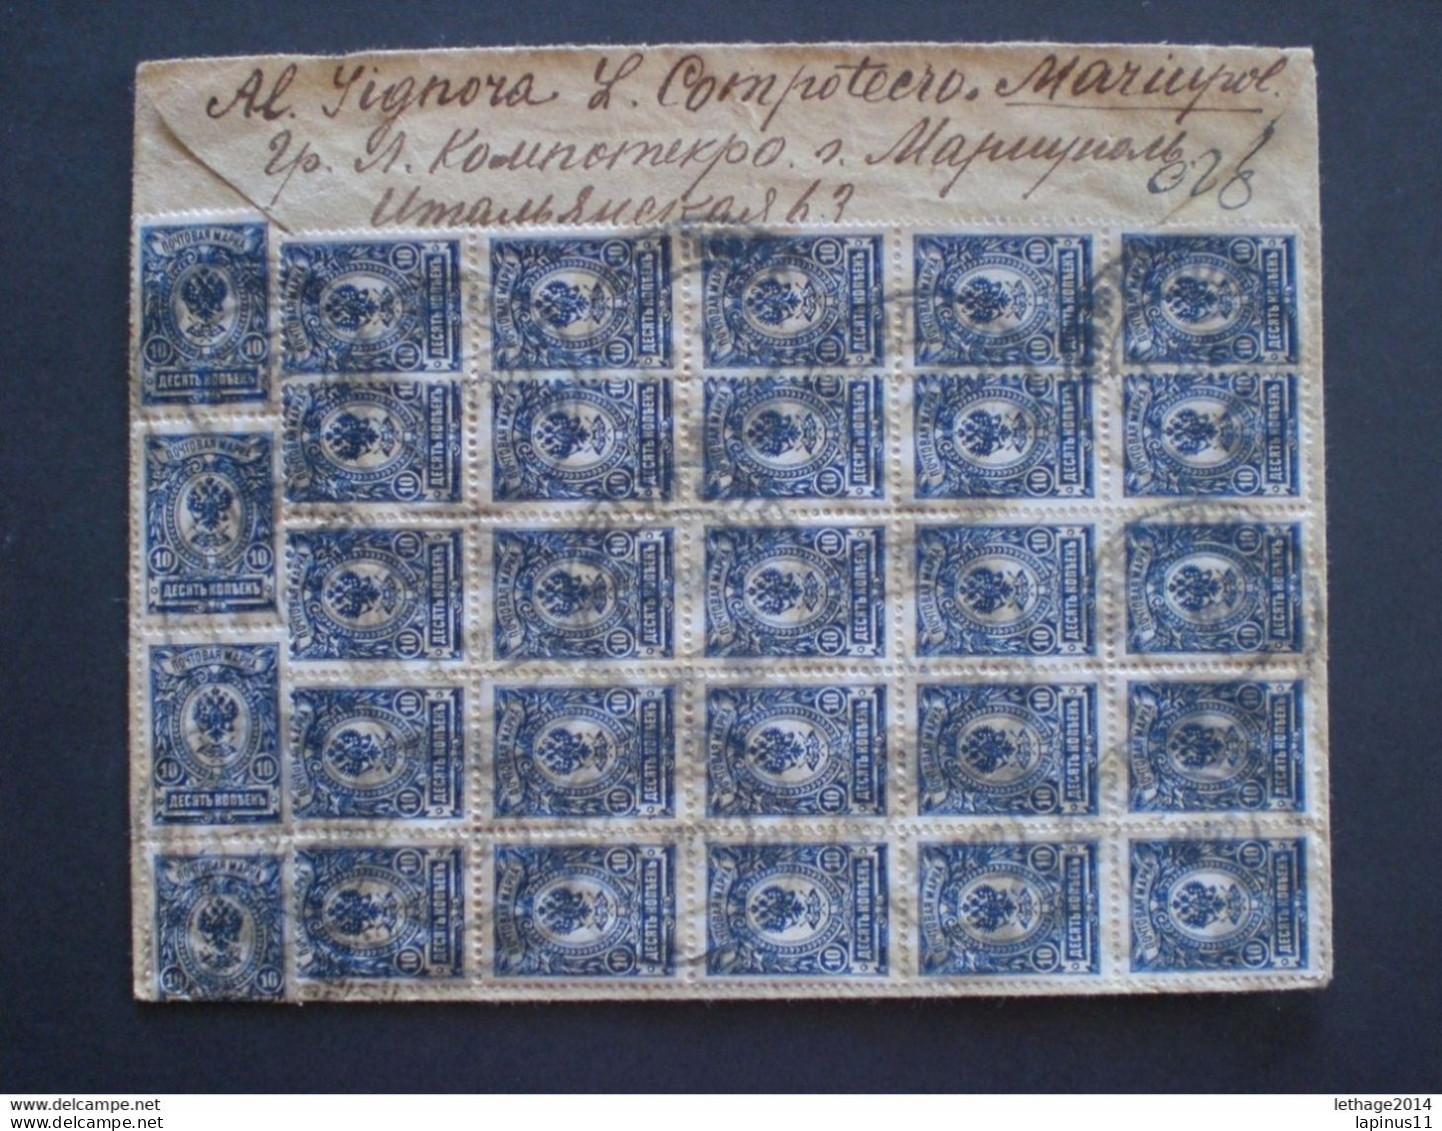 RUSSIA RUSSIE РОССИЯ STAMPS COVER 1923 Registered Mail RUSSIE TO ITALY MANY STAMPS FULL 30 STAMPS !! RRRRR RIF.TAGG.(2) - Covers & Documents